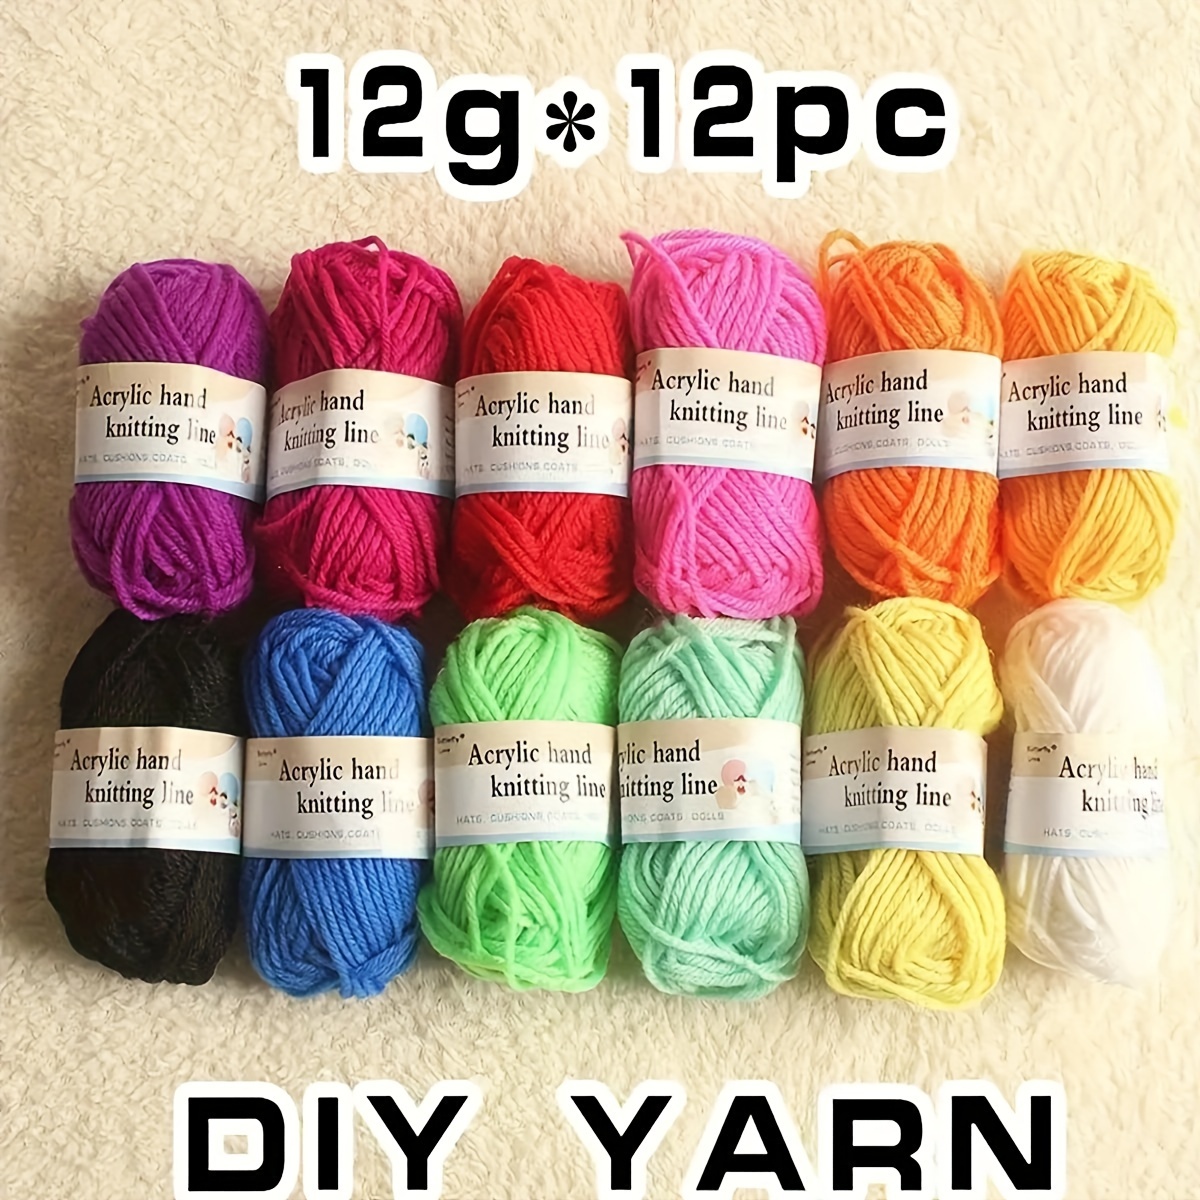 

12-pack Vibrant Acrylic Yarn, 12g Each - Perfect For Crochet & Knitting, Assorted Colors For Diy Crafts, Clothing, Hats, Scarves | Soft Polyester Blend Yarn Crochet Knitting Accessories And Supplies